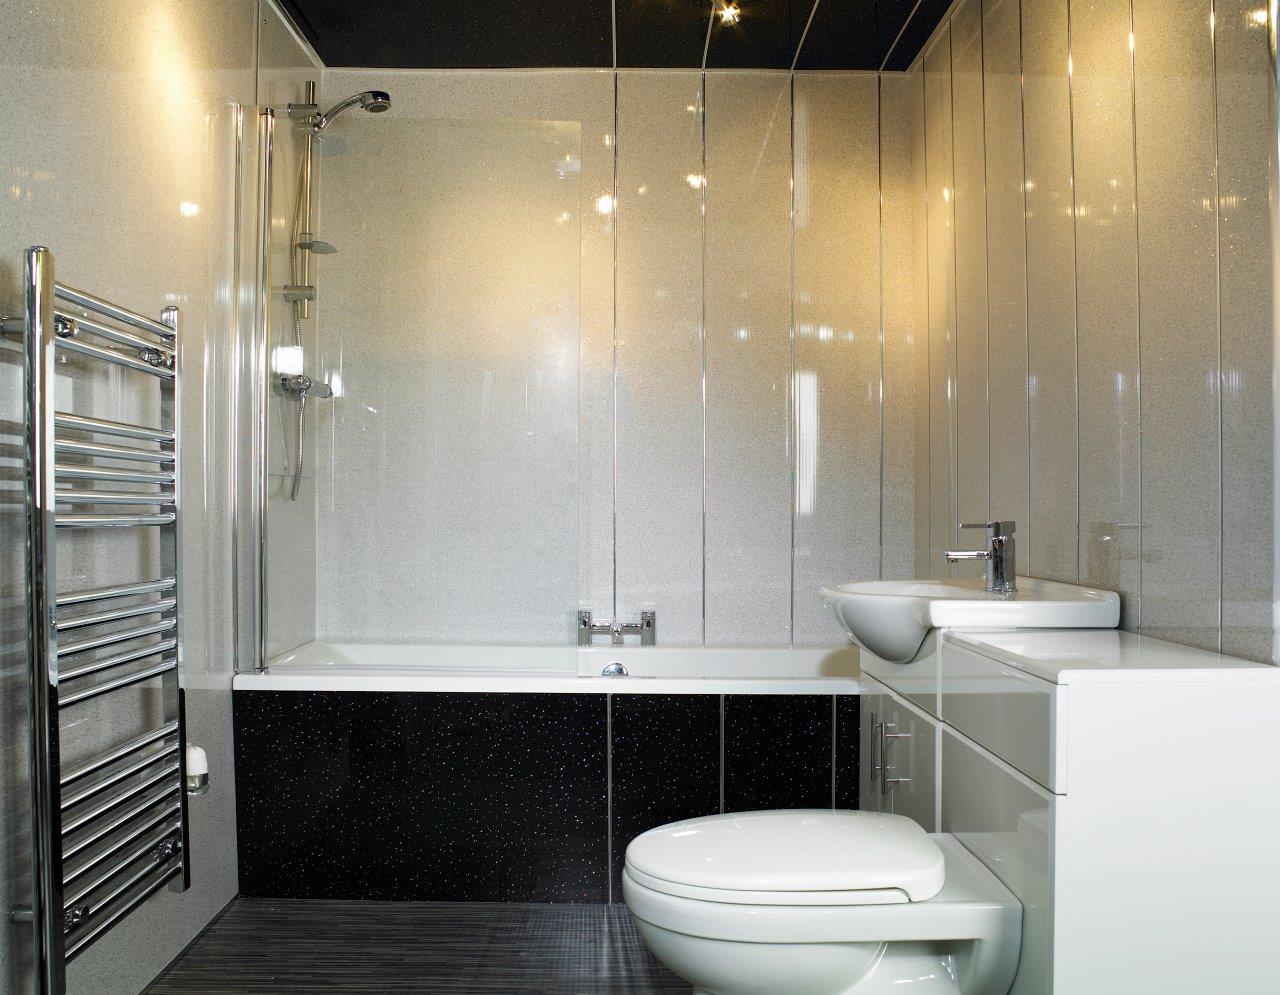 Select the shower wall covering of your choice for your bathroom